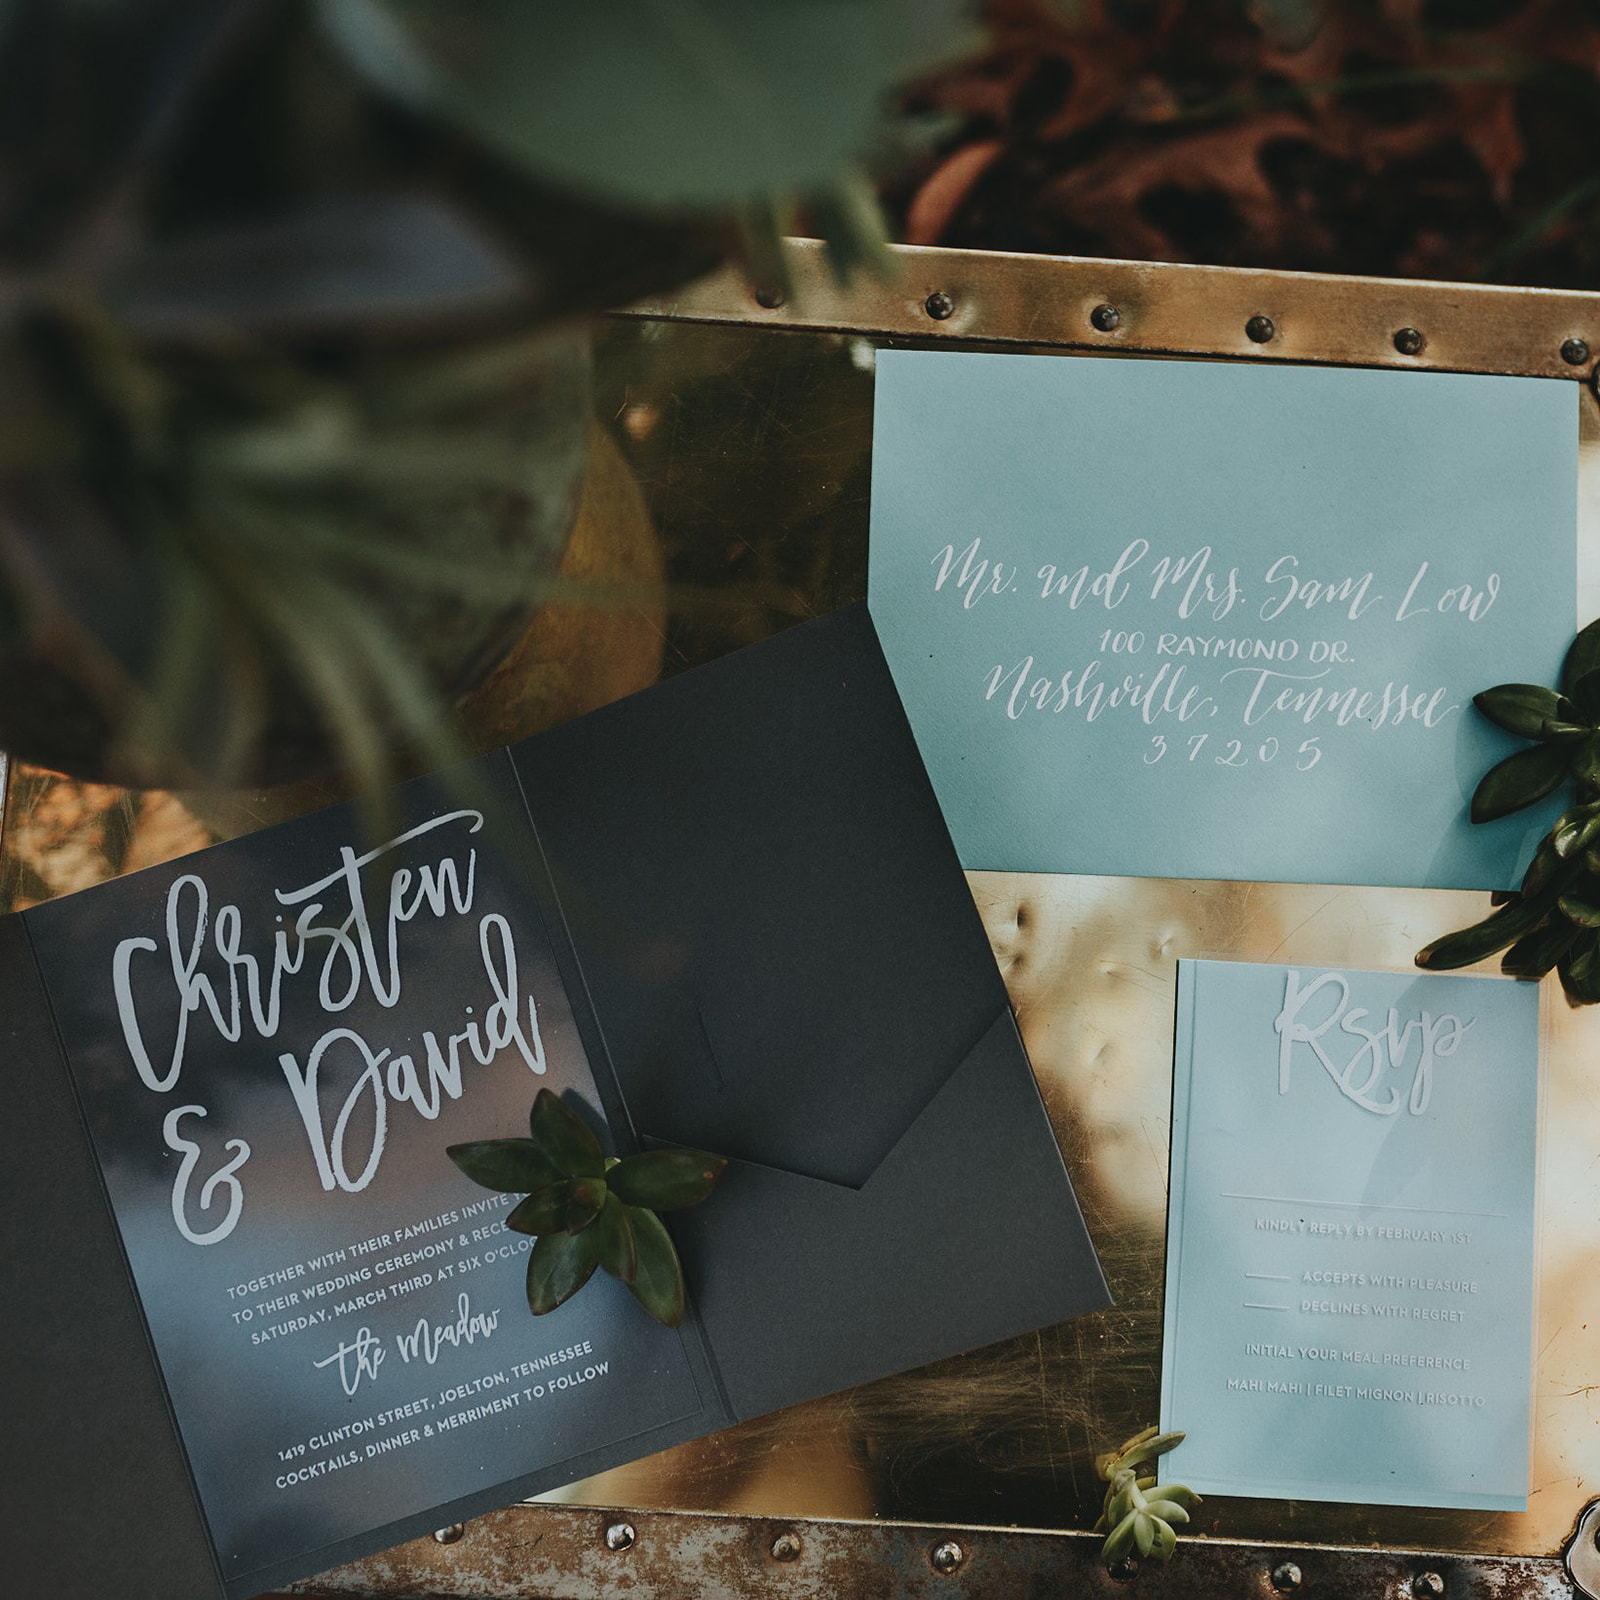 Affordable wedding invitations by Abigail Maki Photography. Includes wedding invitation inspiration and wedding details. Book your San Fransico wedding and browse the blog for more inspiration #wedding #photography #weddingphotography #sanfranciscophotographer